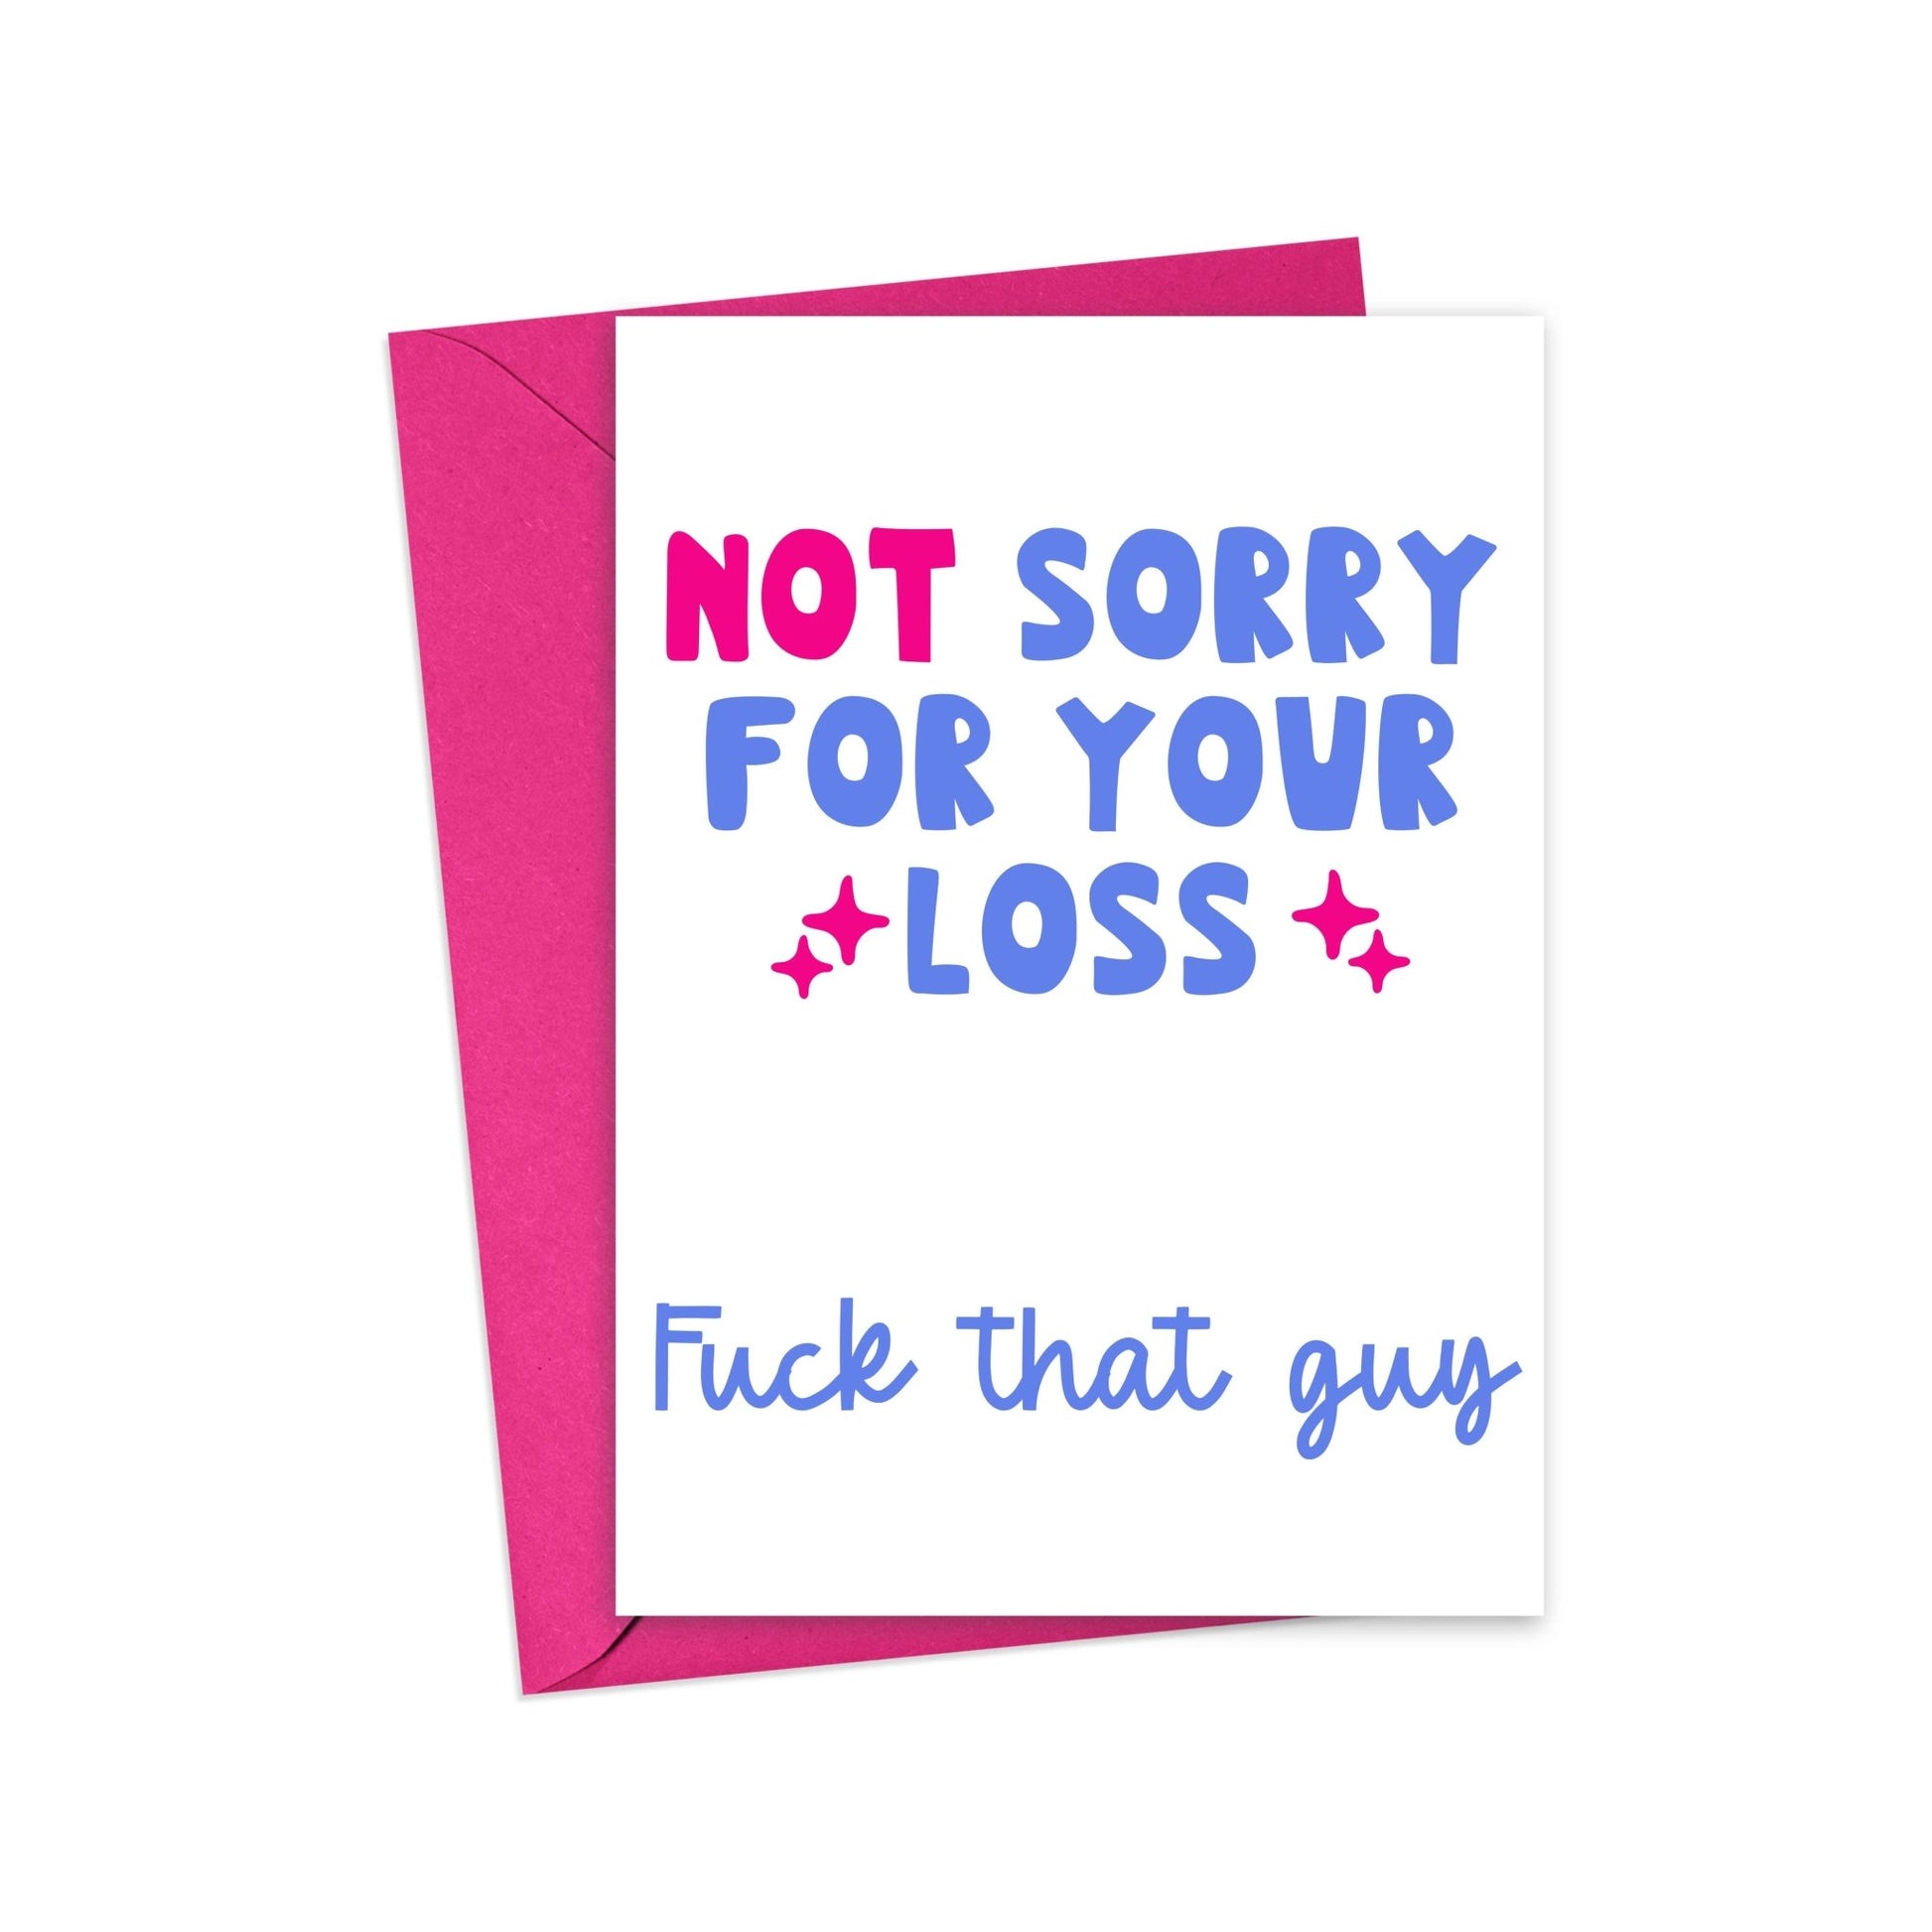 R is for Robo - Not Sorry Funny Breakup Card - Sassy Divorce Card for Friend - Addie Rose Boutique - Austin